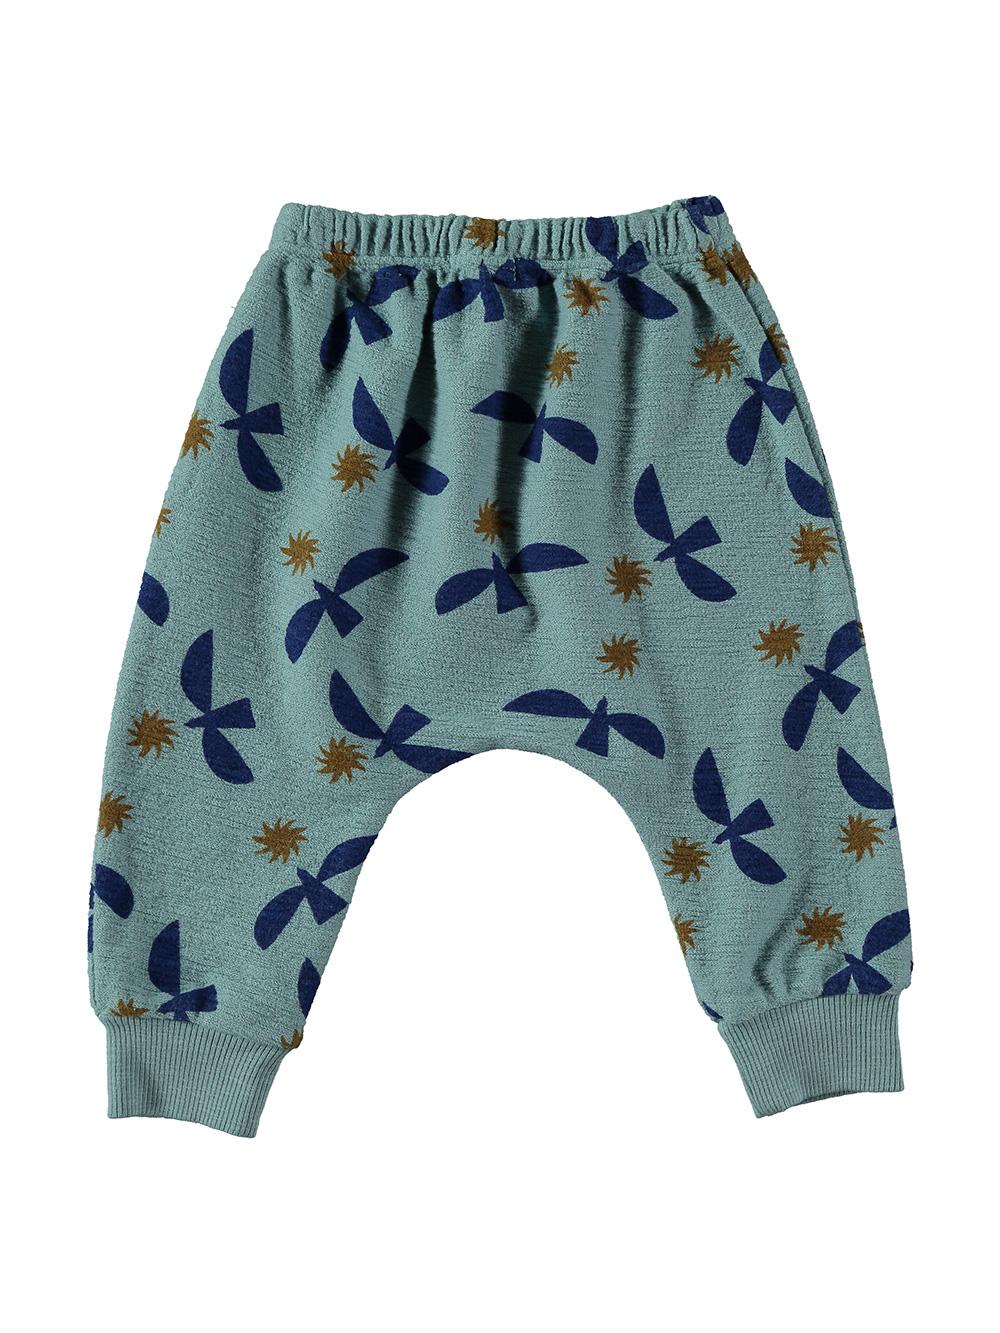 BLUE BIRDS AND SUNS PRINTED PANTS